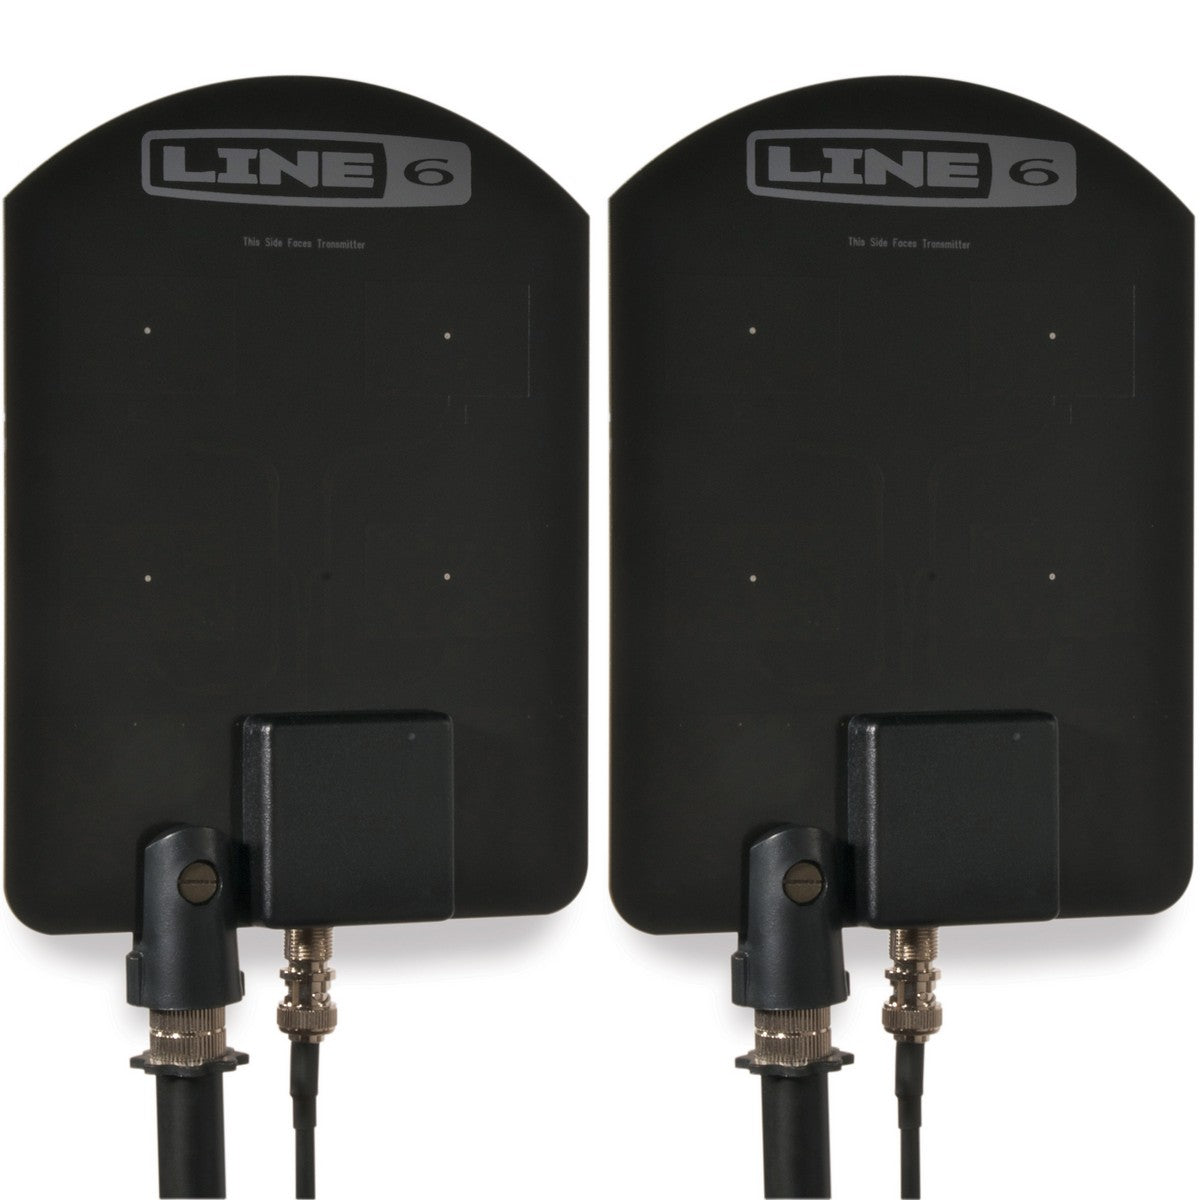 Line 6 P180 Antenna Pair 2.4 GHz Wireless Directional Active Antenna Pair for XD-V75 XD-V70 XD-V55 Relay G90 XD-AD8 (Used)